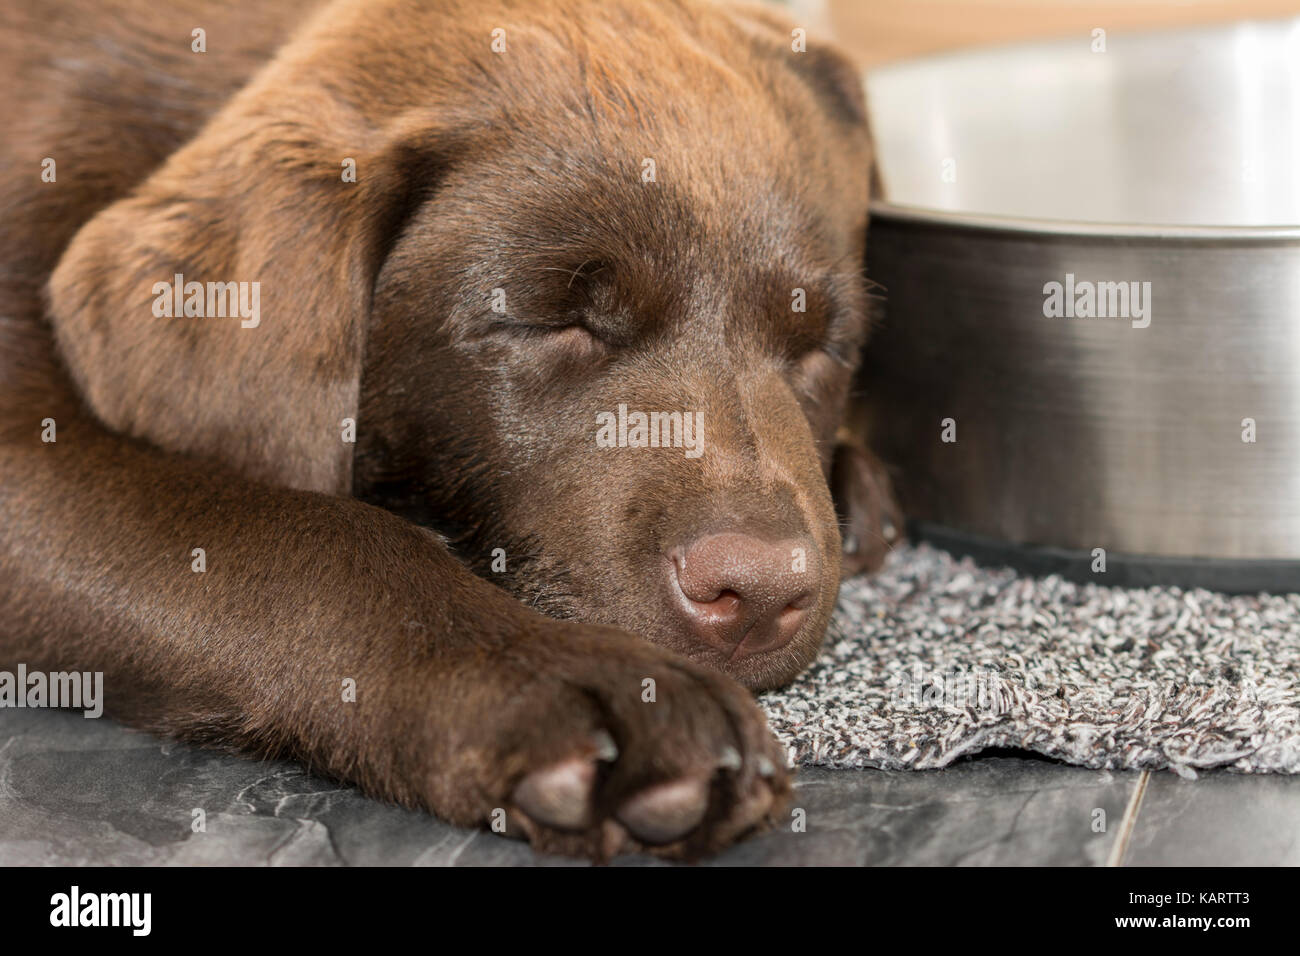 Closeup view of a 3-month-old Chocolate Labrador sleeping next to a water bowl in the kitchen Stock Photo